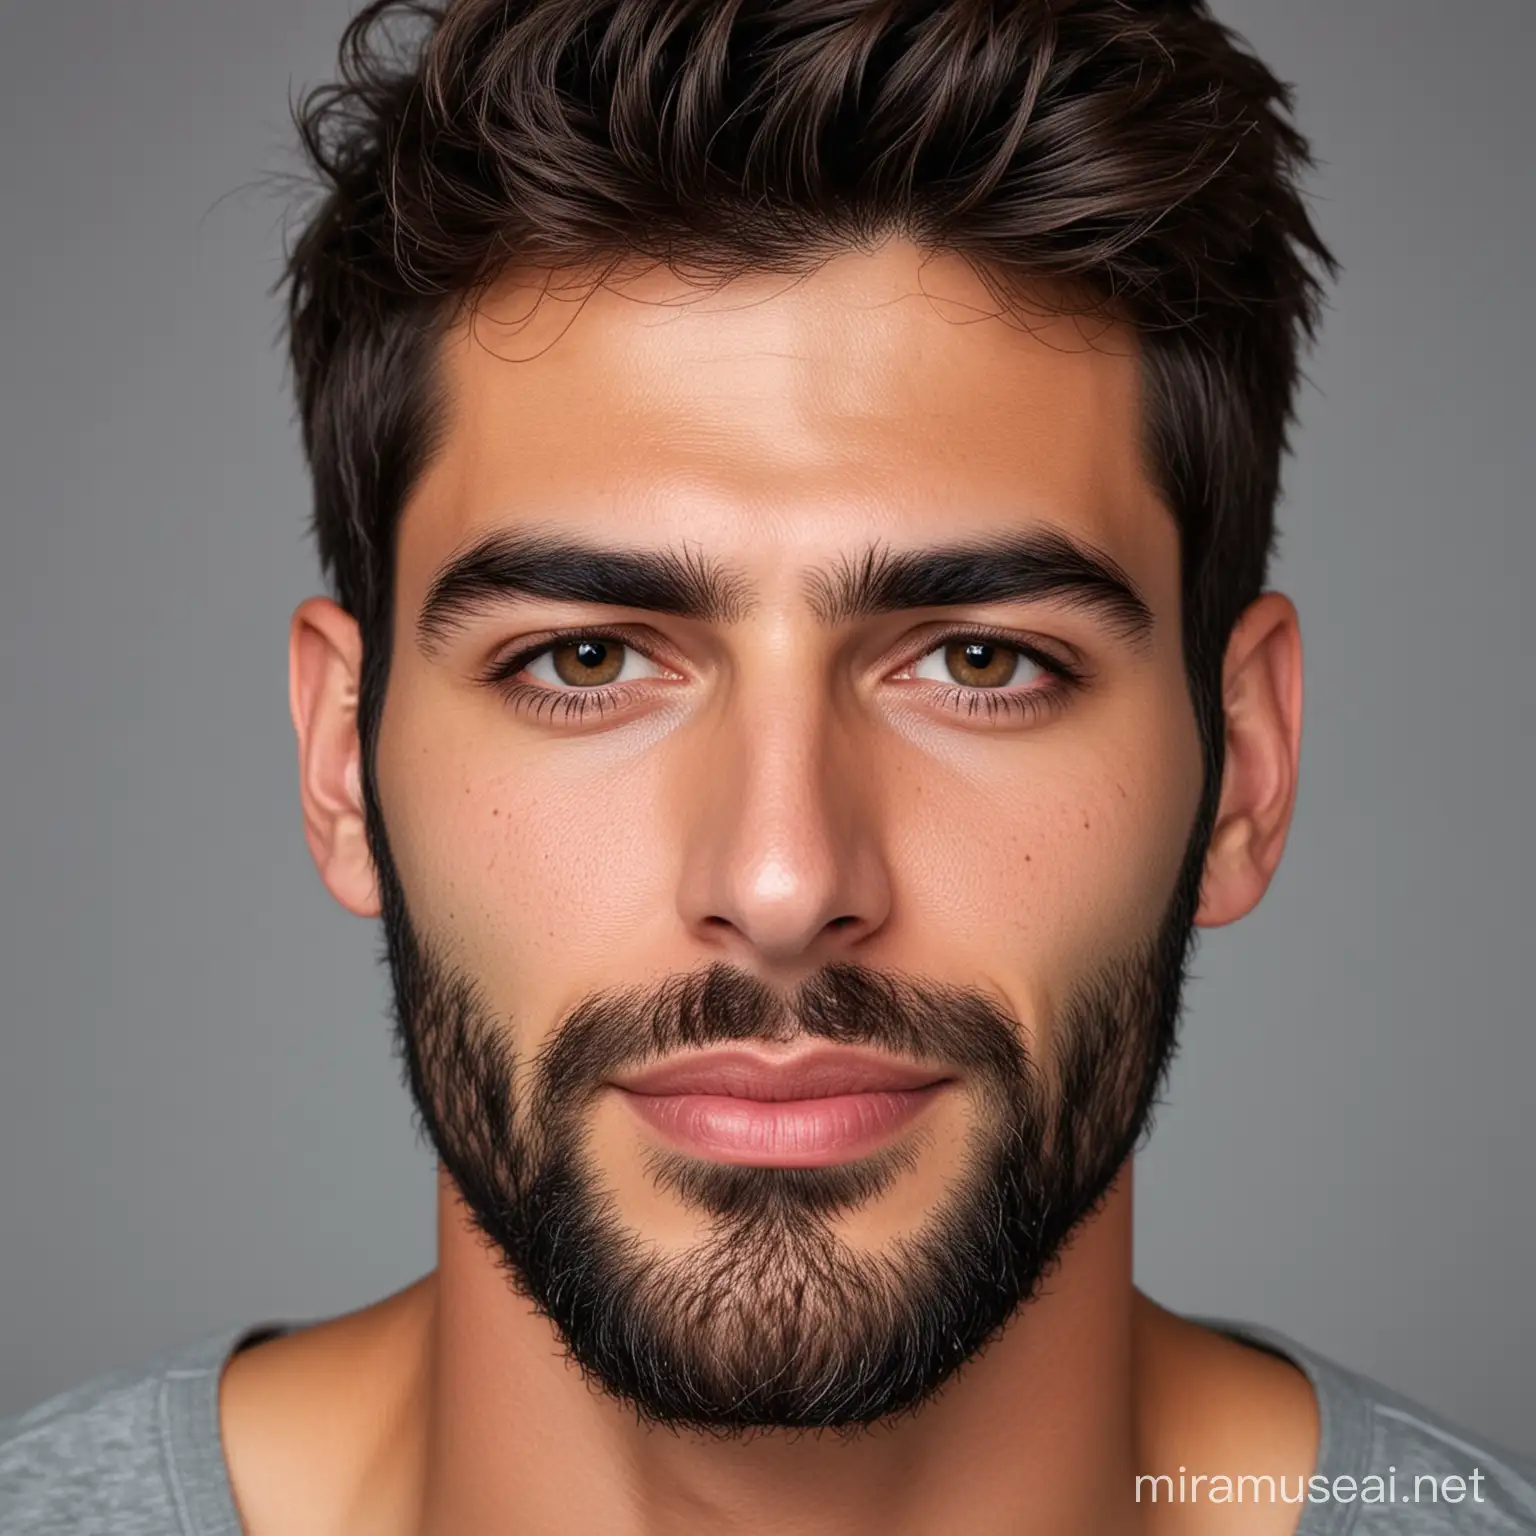 29 yo handsome spanish man face, beard, symmetric face, handsome, thick brows, perfect, HD, 8K, skin texture, square jaw, front view,